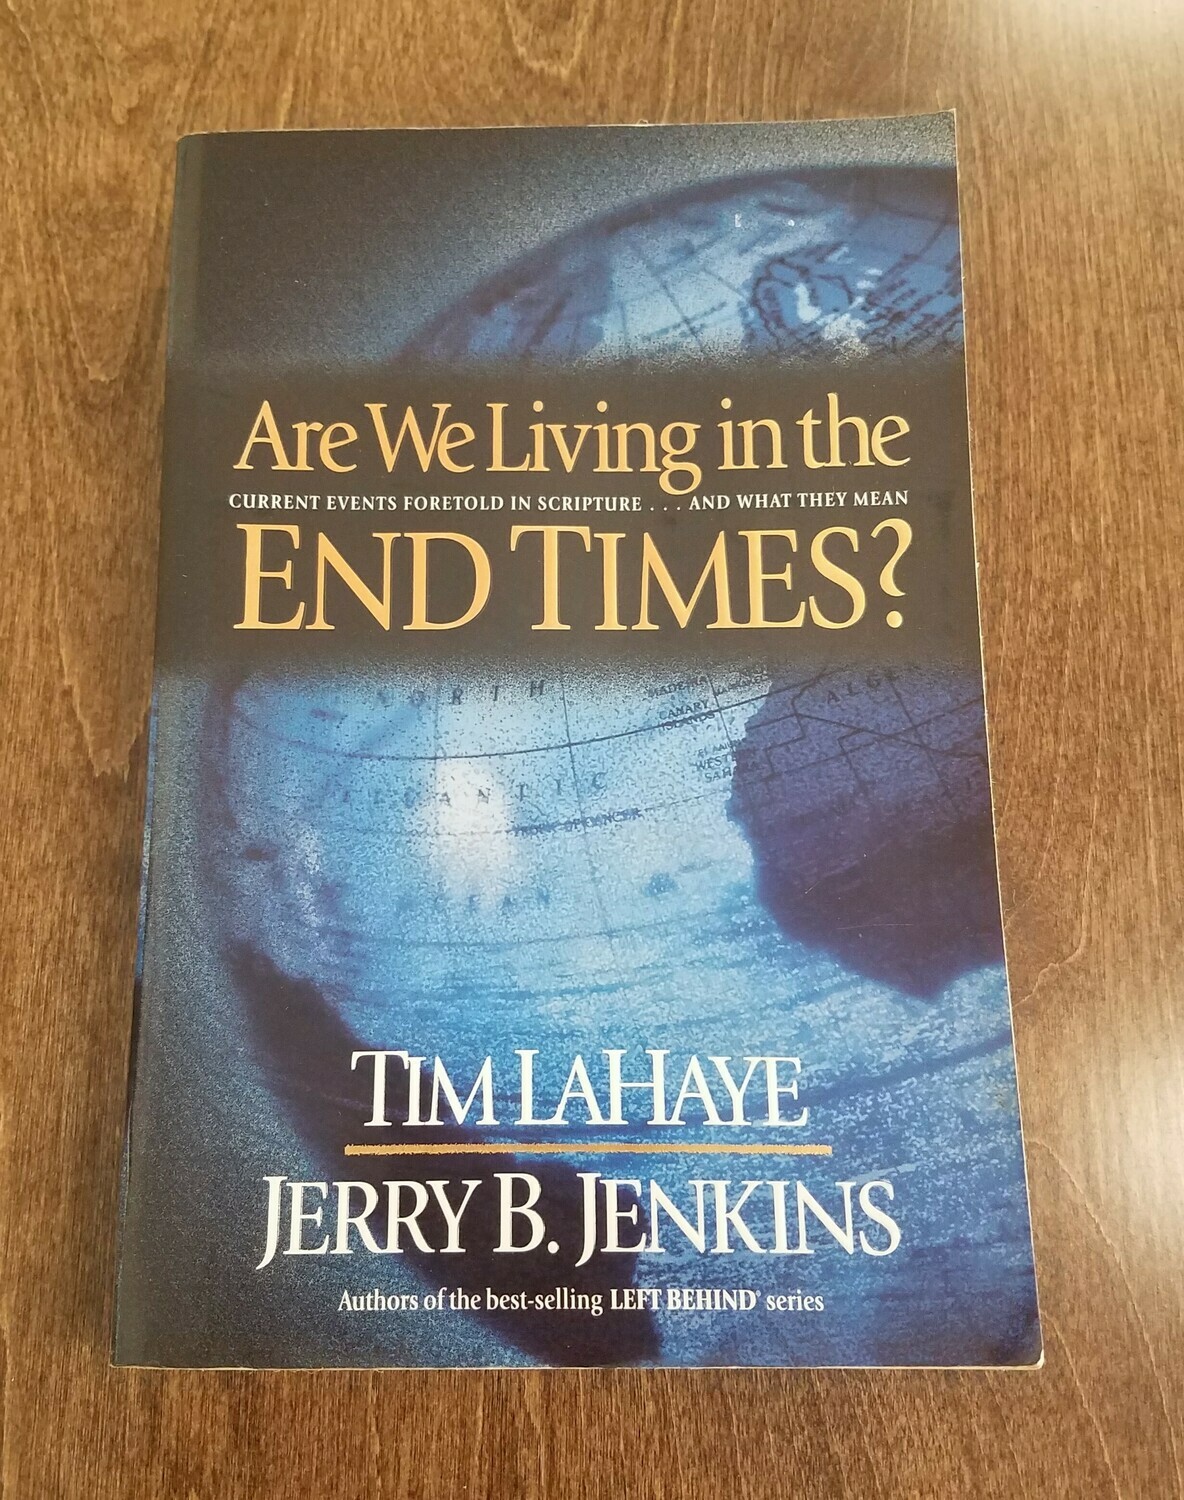 Are We Living in the End Times? by Tim LaHaye and Jerry B. Jenkins - Paperback